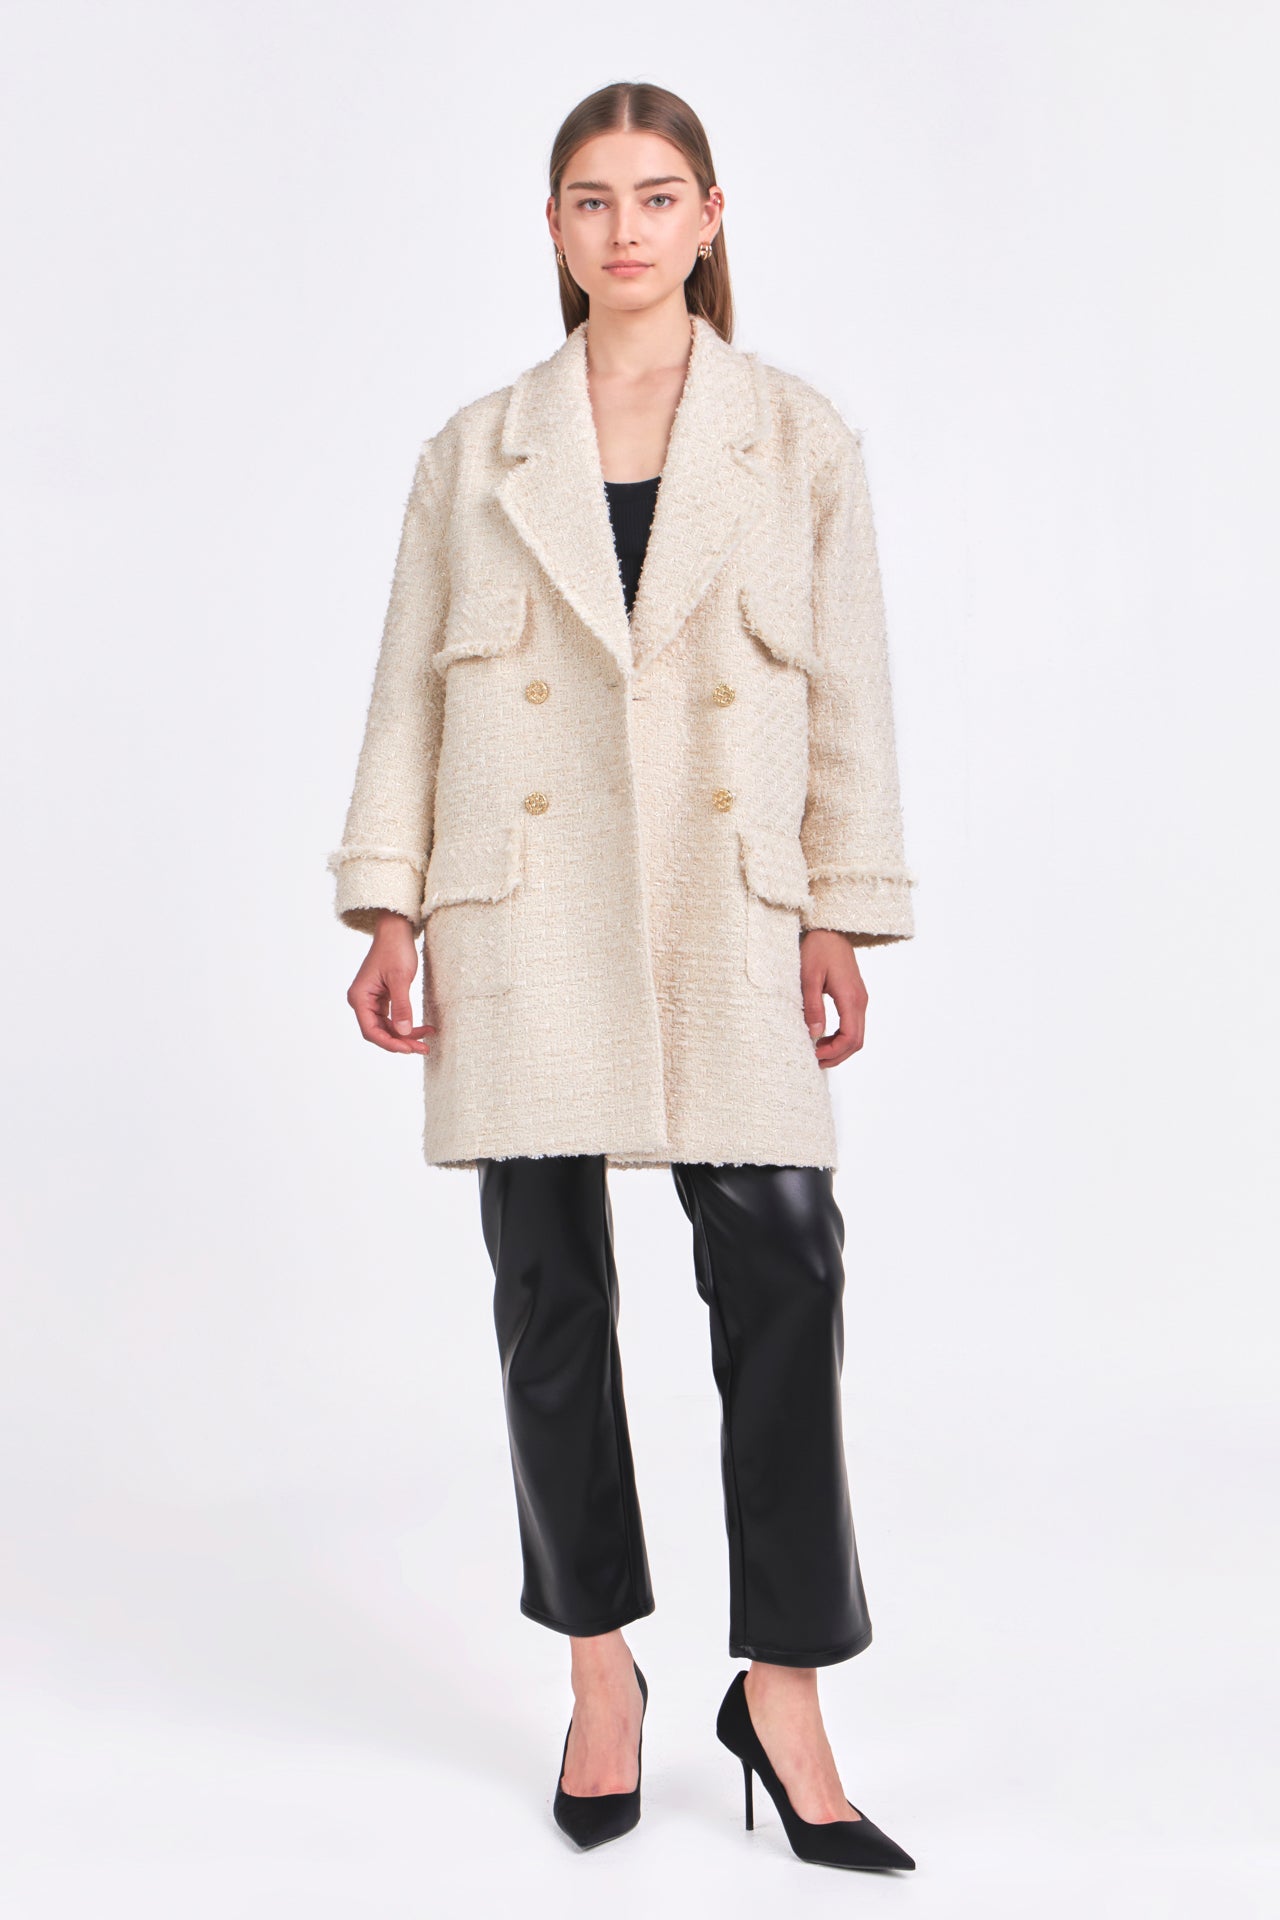 ENDLESS ROSE - Tweed Fringe Double Breast Coat - COATS available at Objectrare